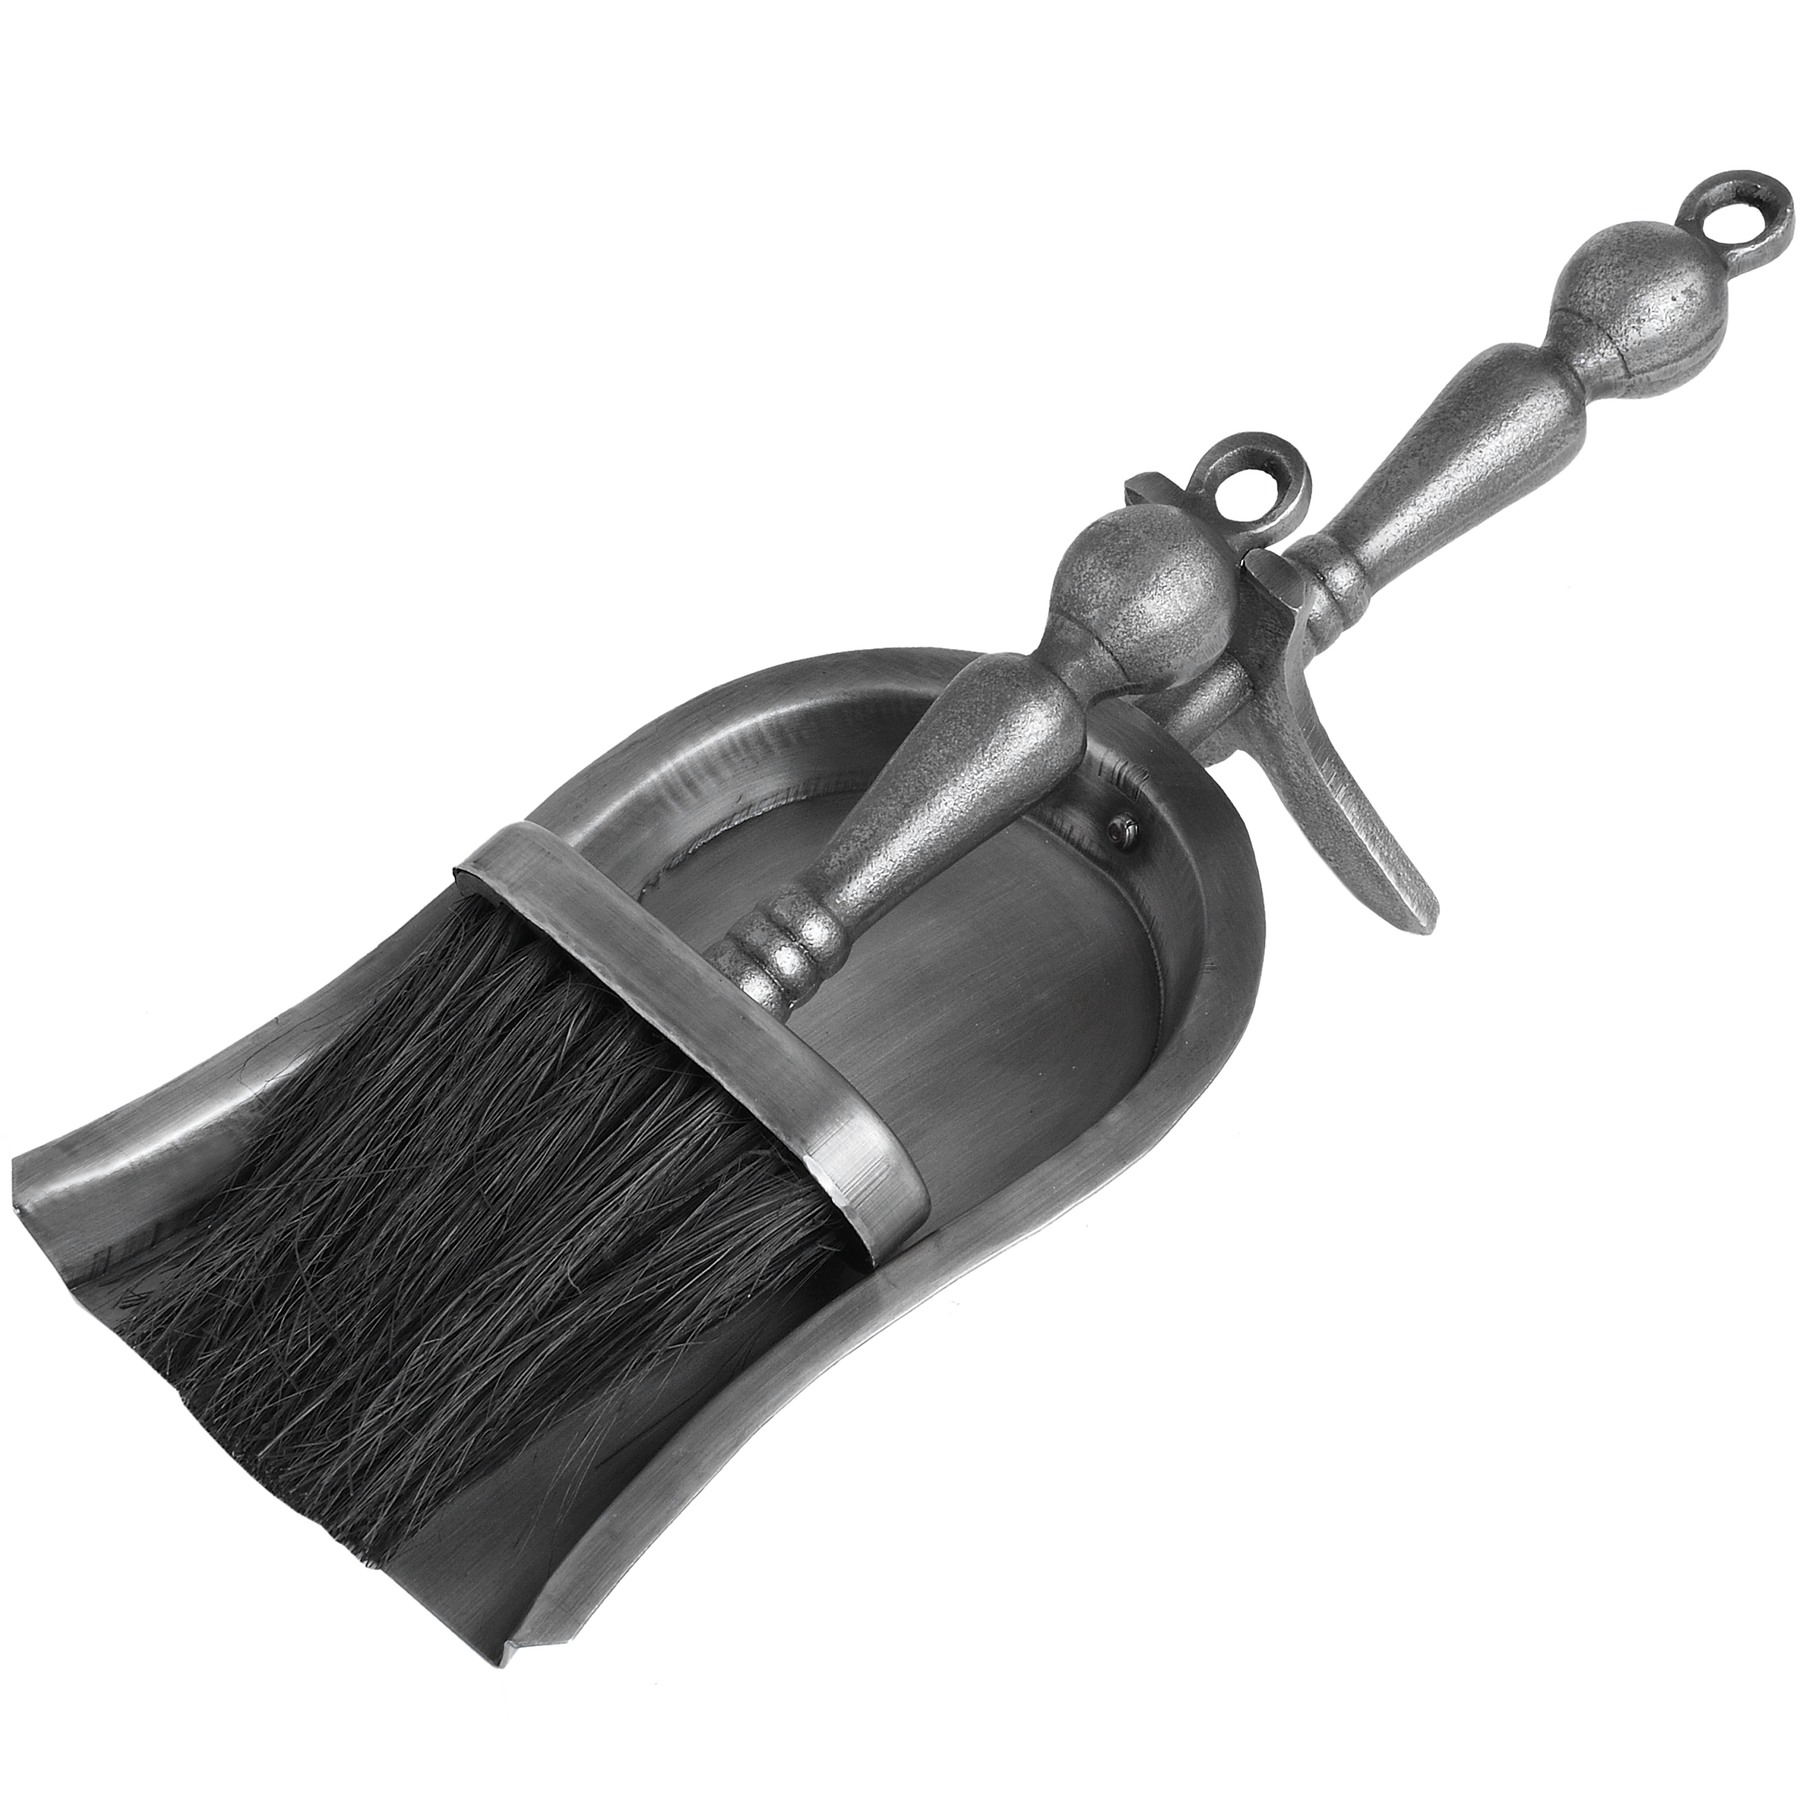 Hearth Tidy Set in Antique Pewter Effect Finish - Image 1